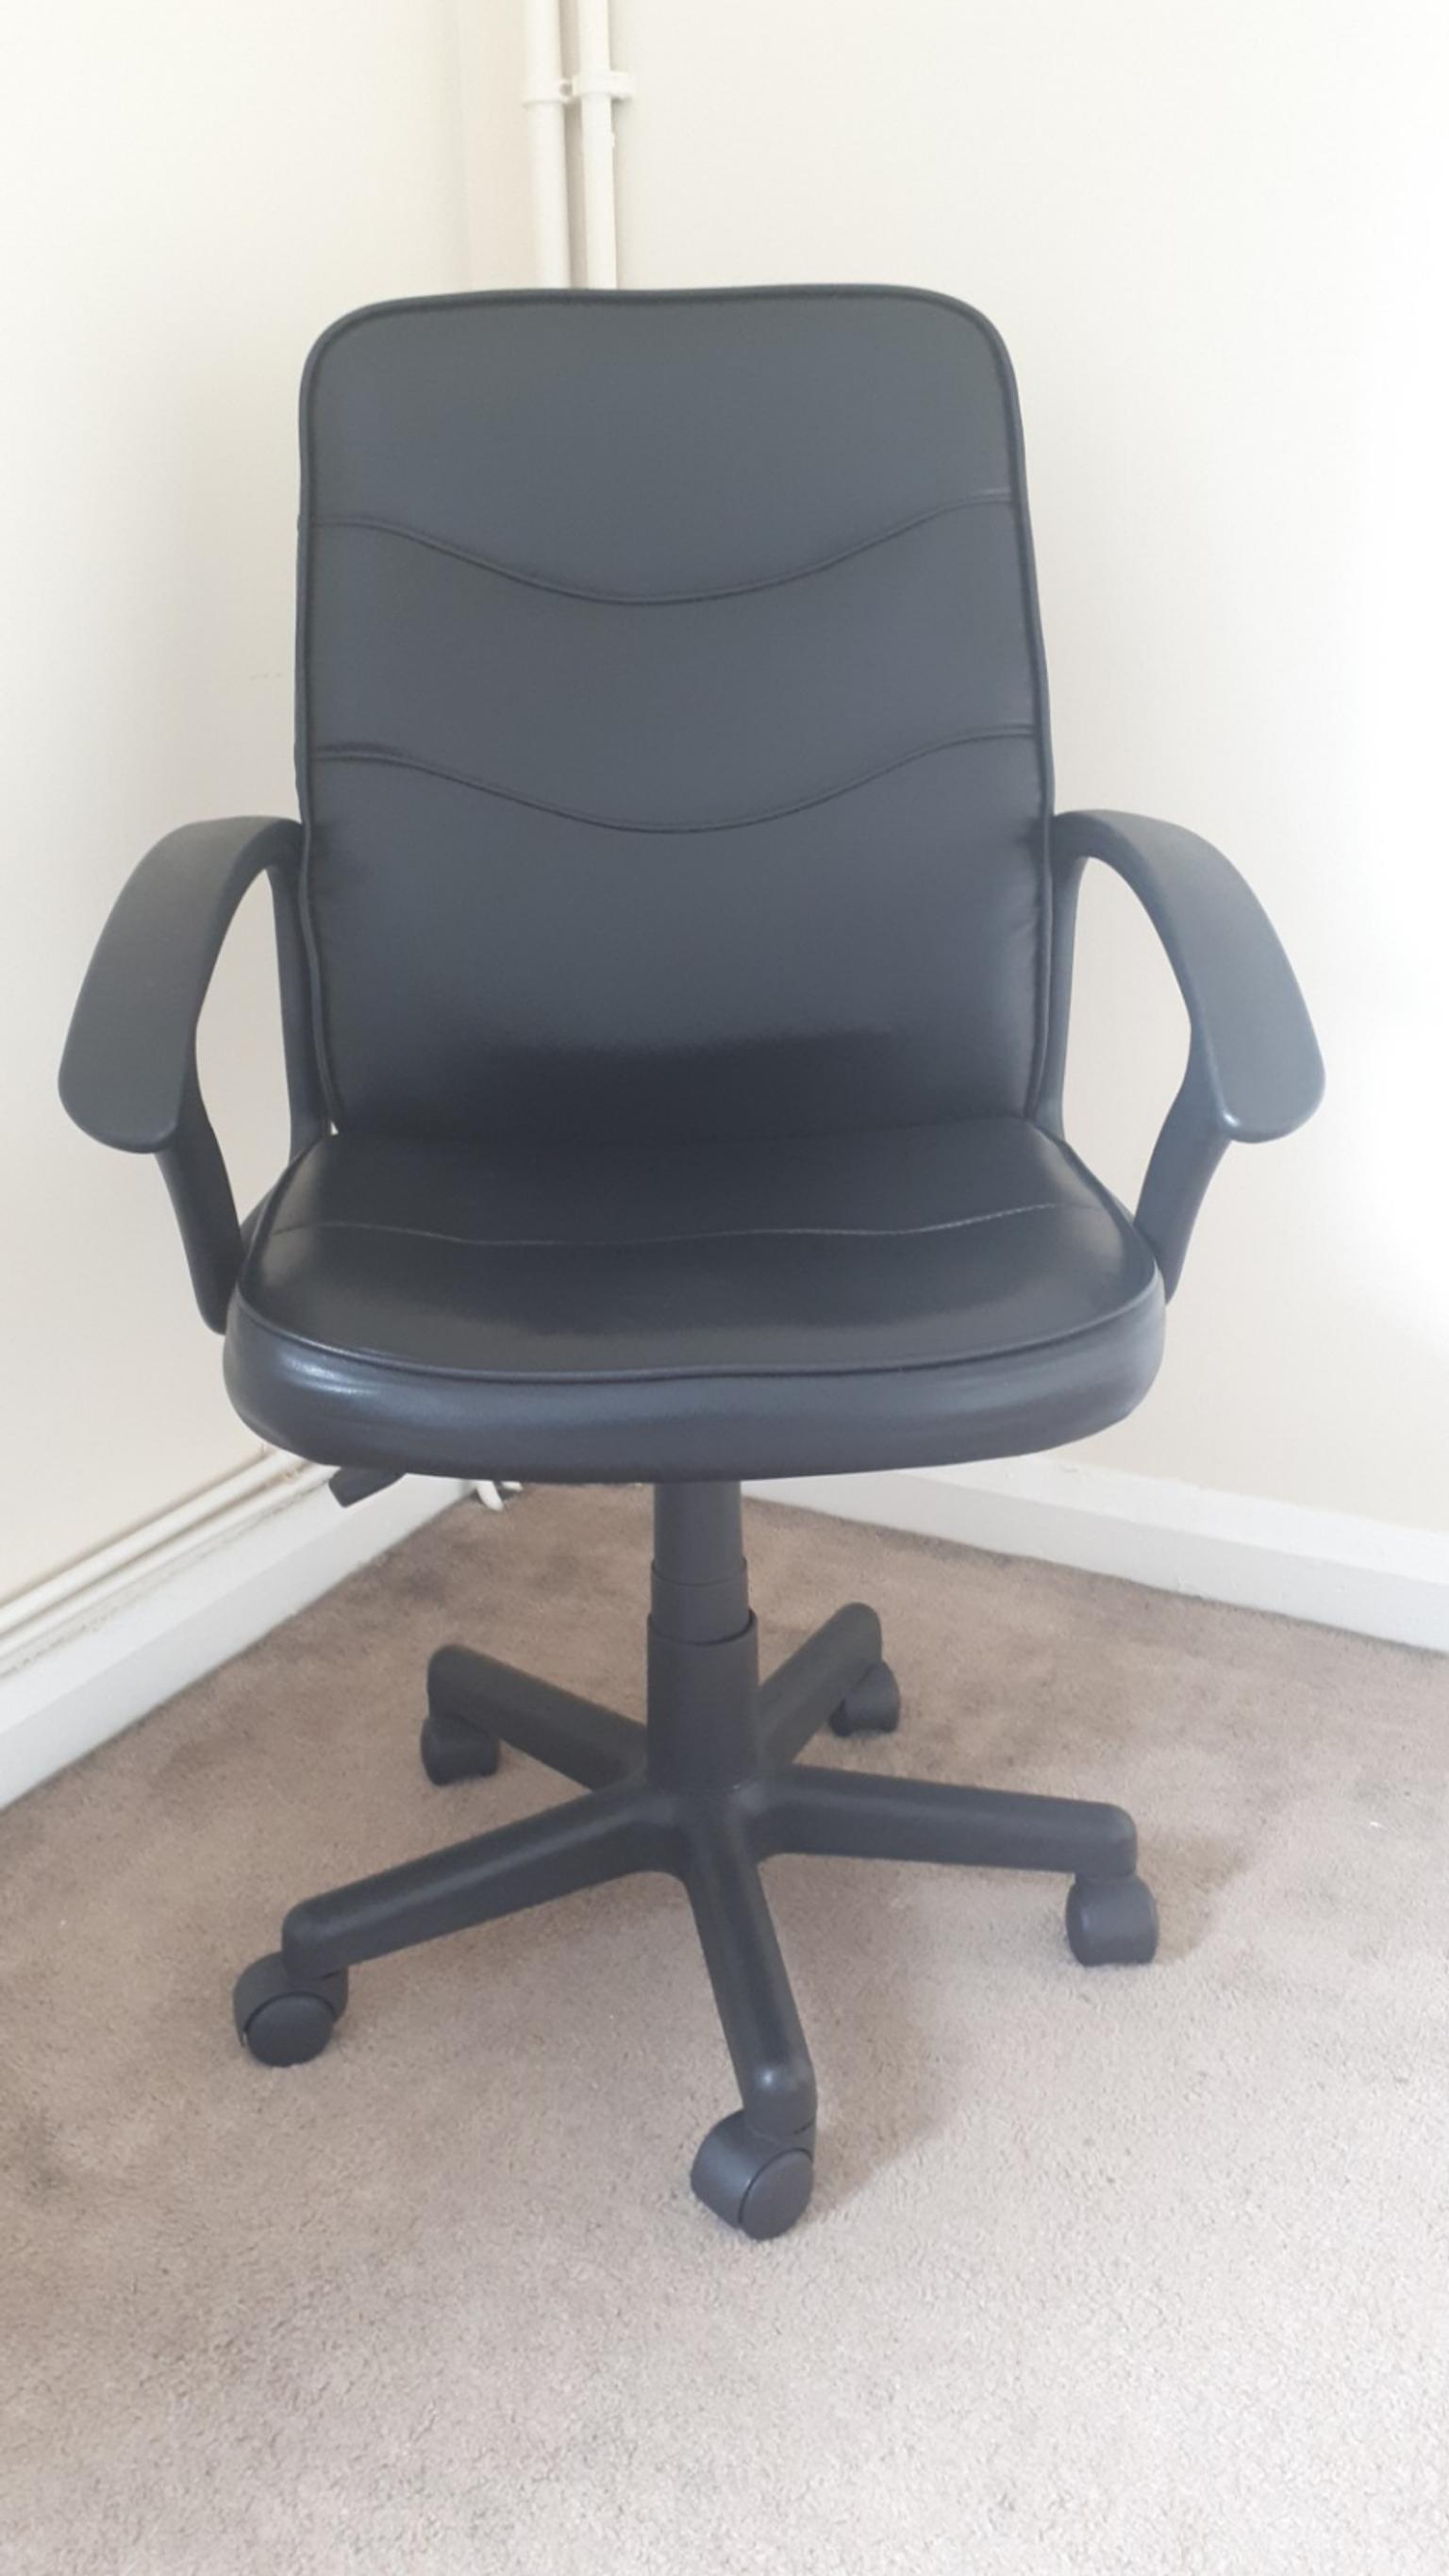 Padded Black Leather Office Chair In Sw17 London Fur 25 00 Zum